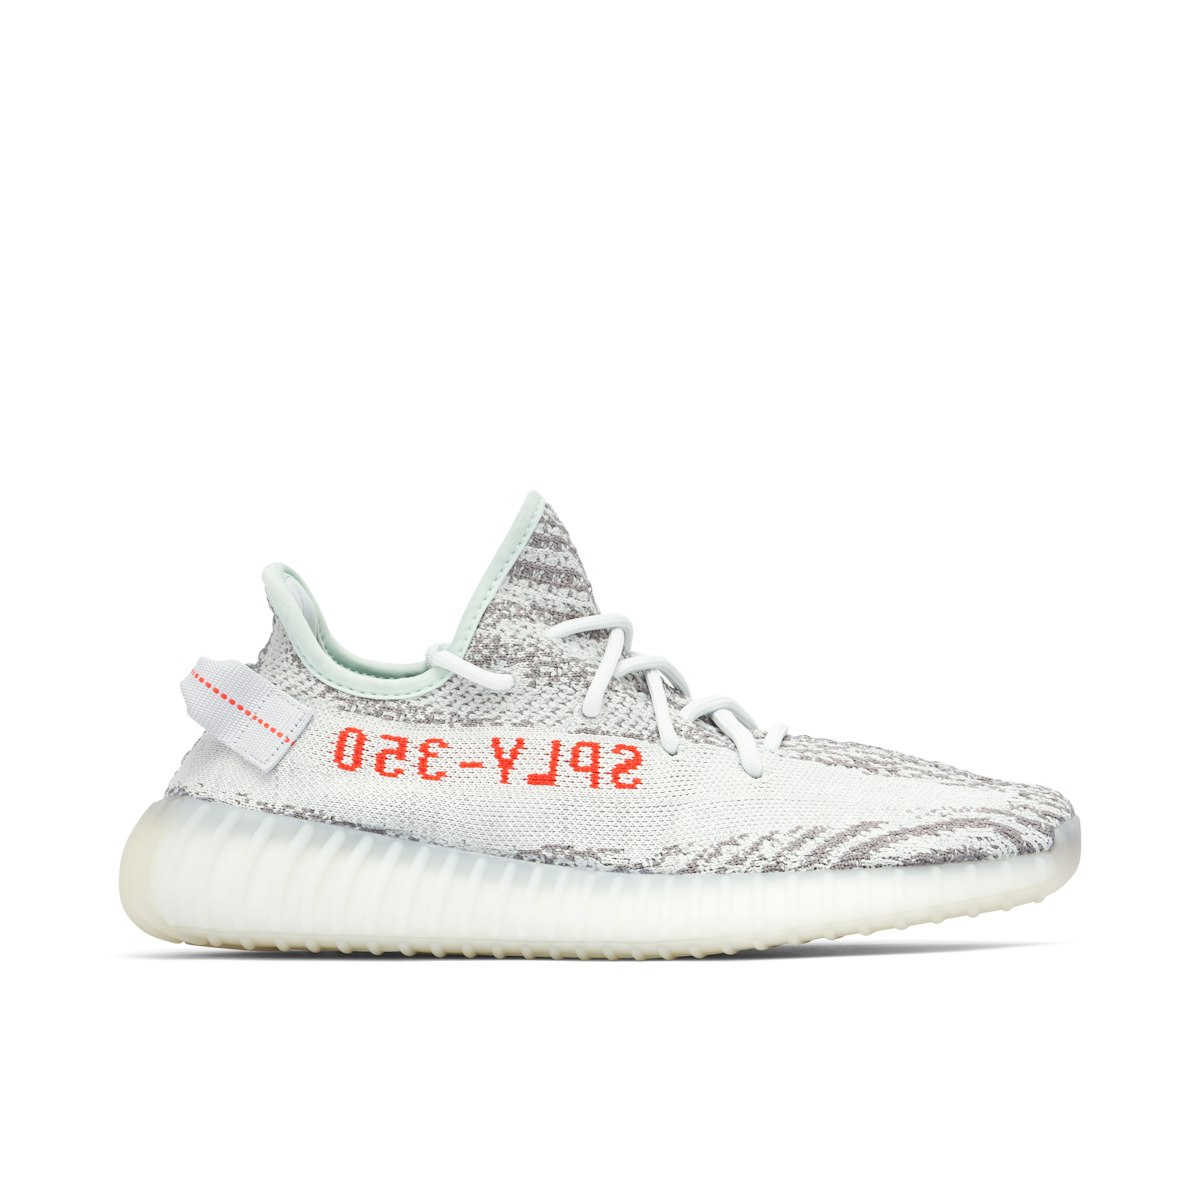 Yeezy Boost 350 V2 Tint | B37571 | Laced